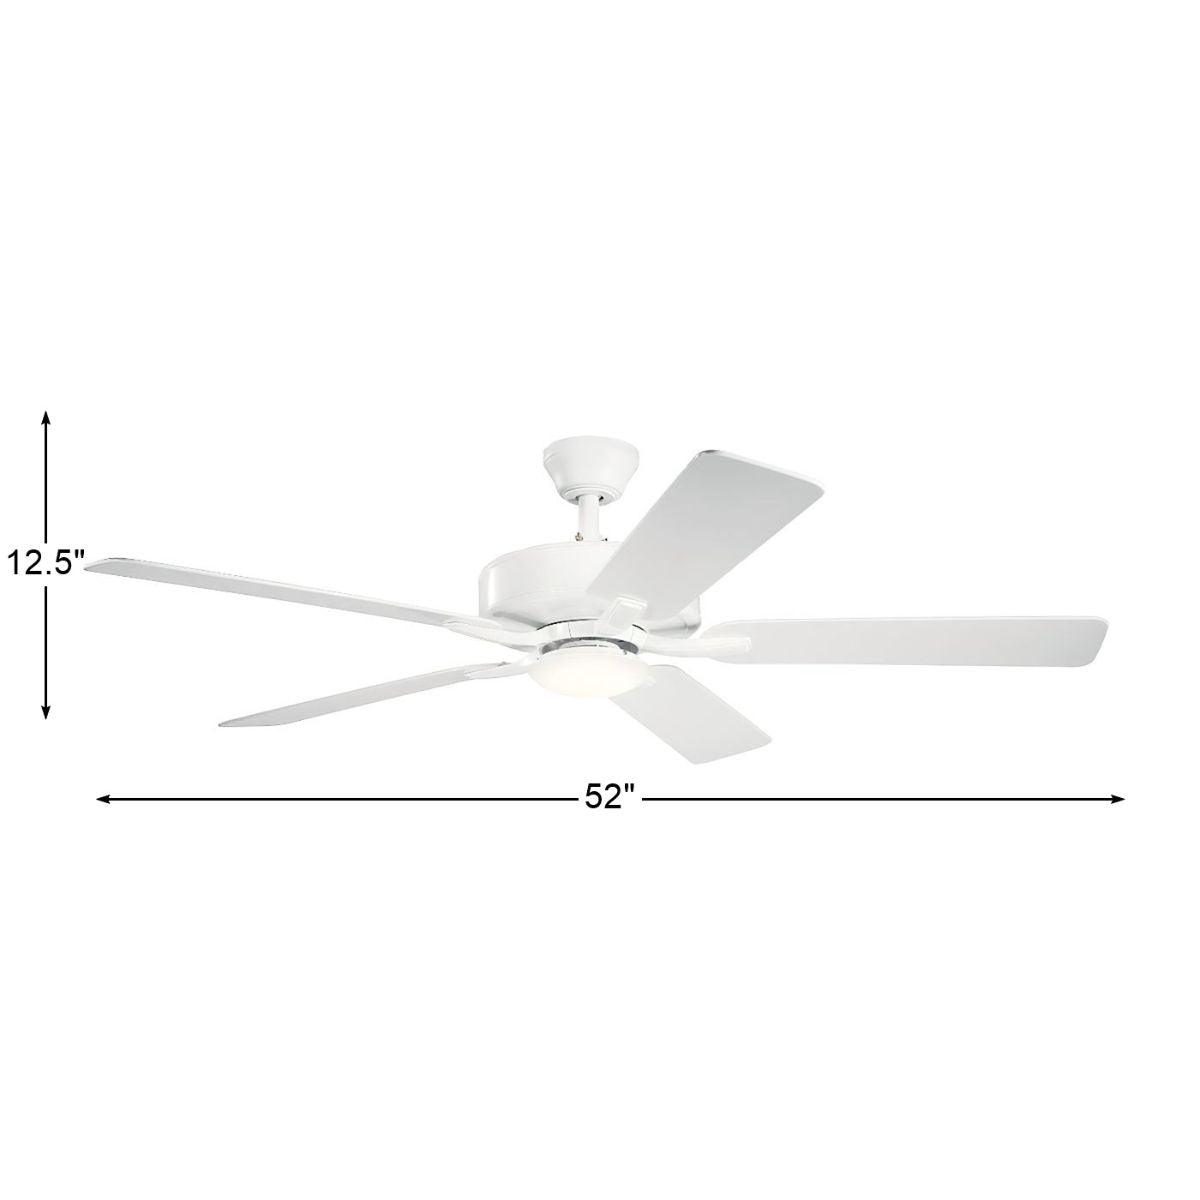 Basics Pro 52 Inch Indoor/Outdoor Ceiling Fan With Light And Remote